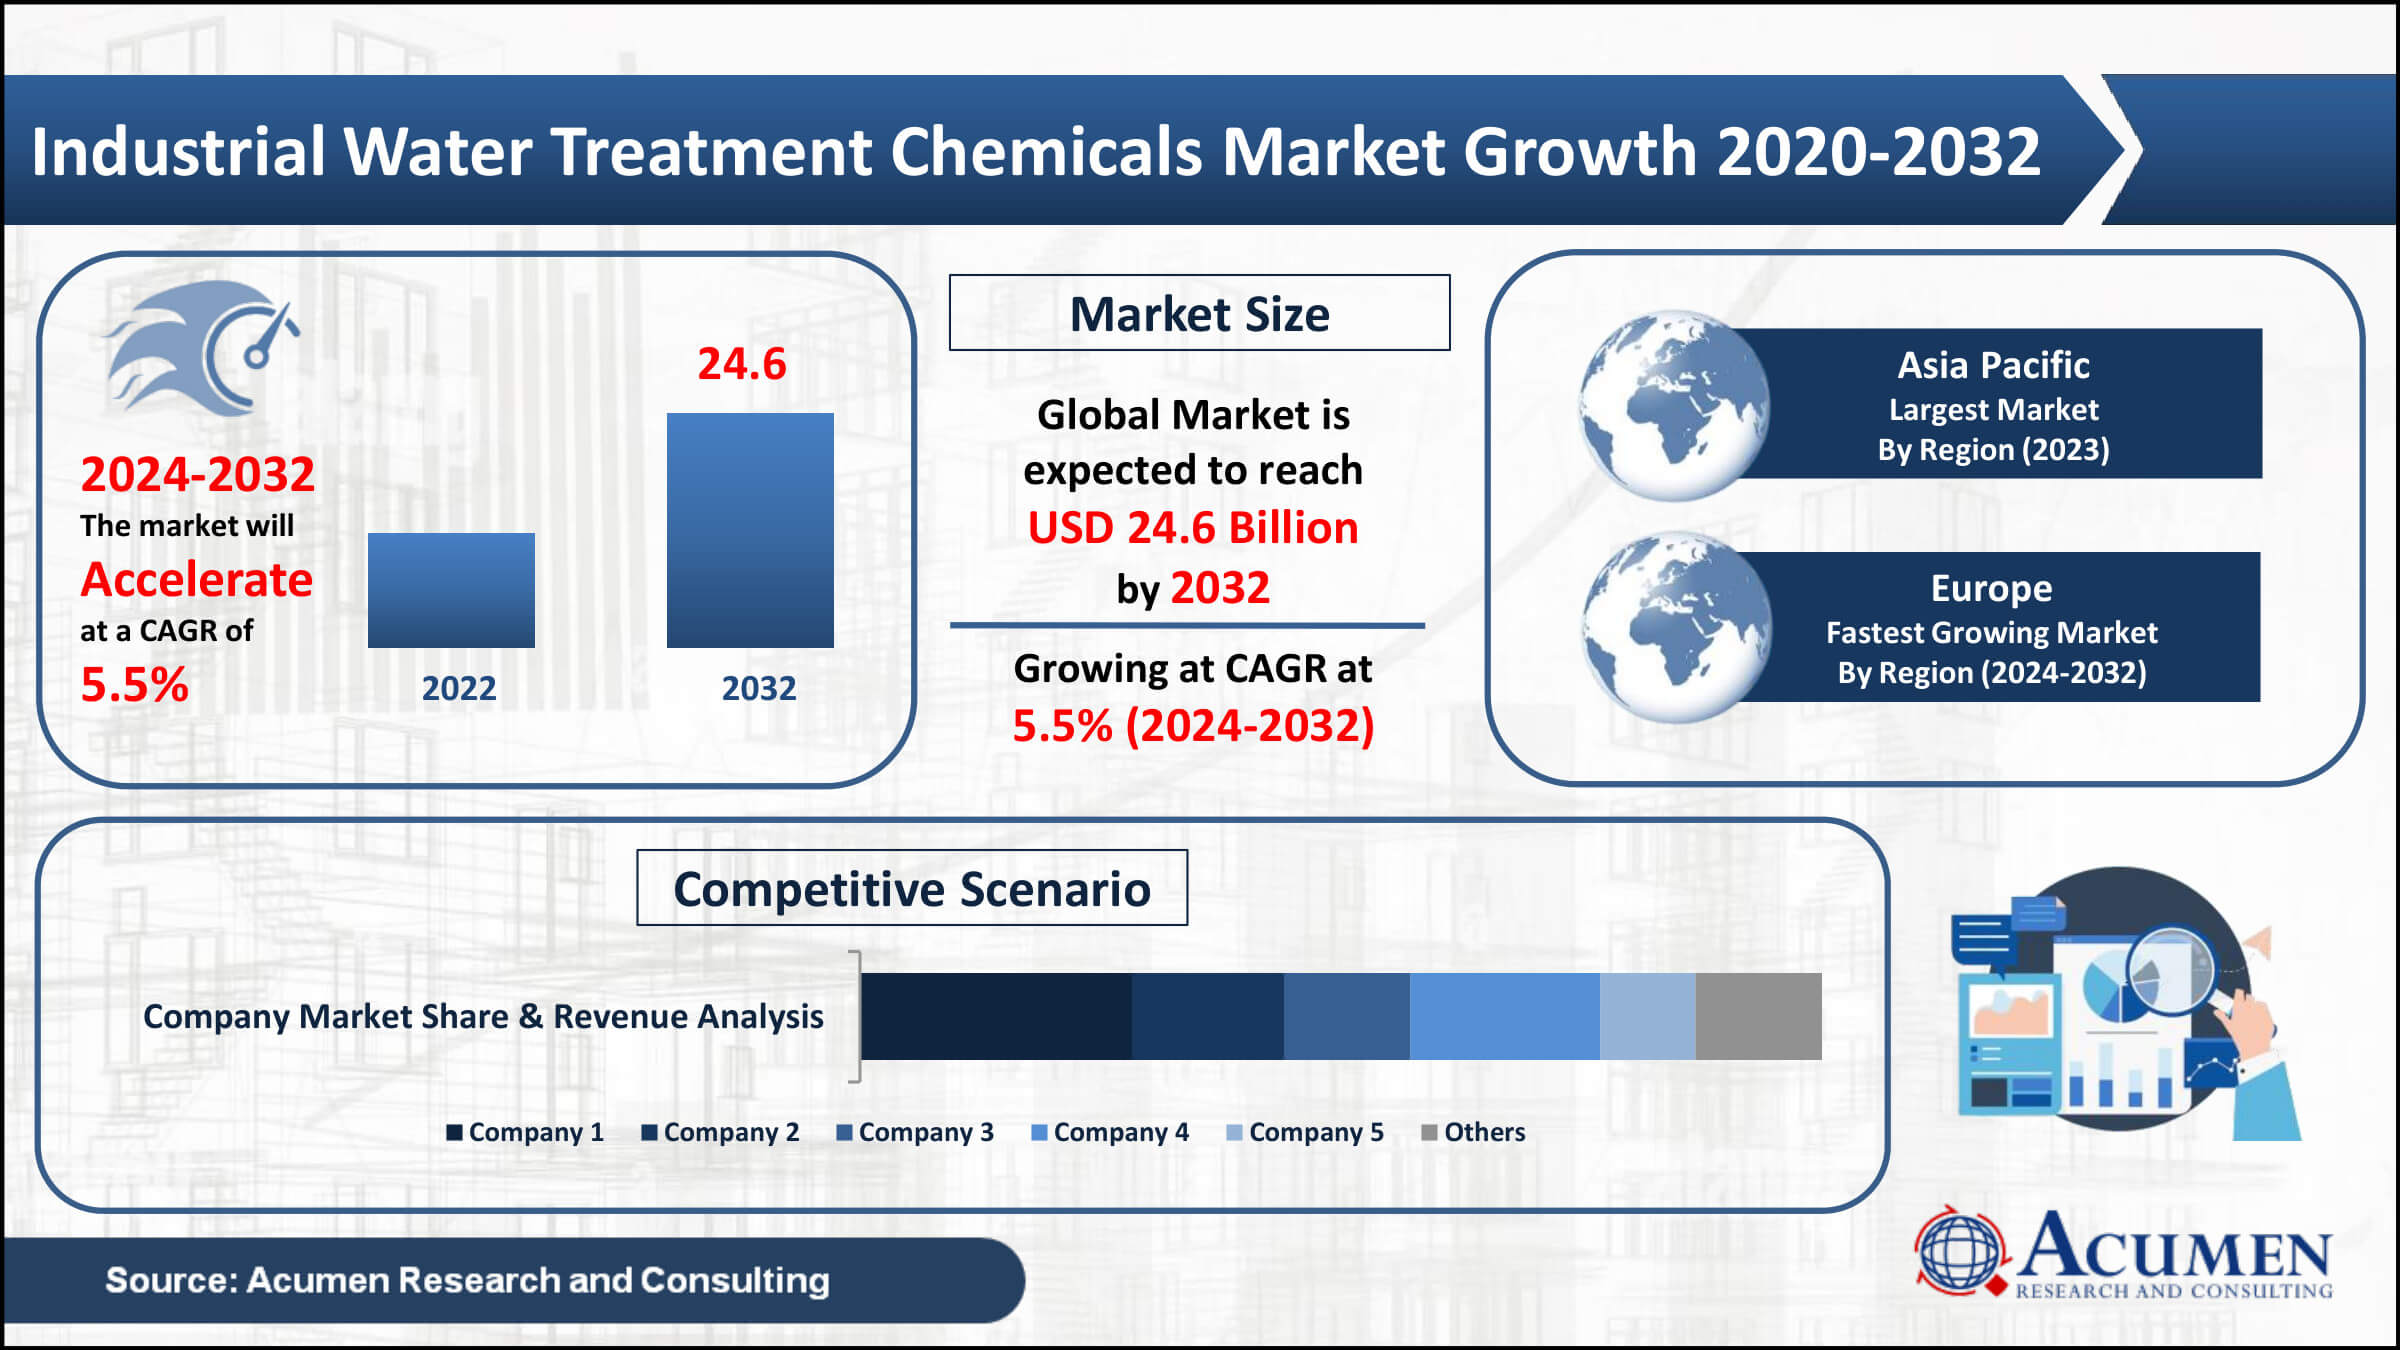 Industrial Water Treatment Chemicals Market Value